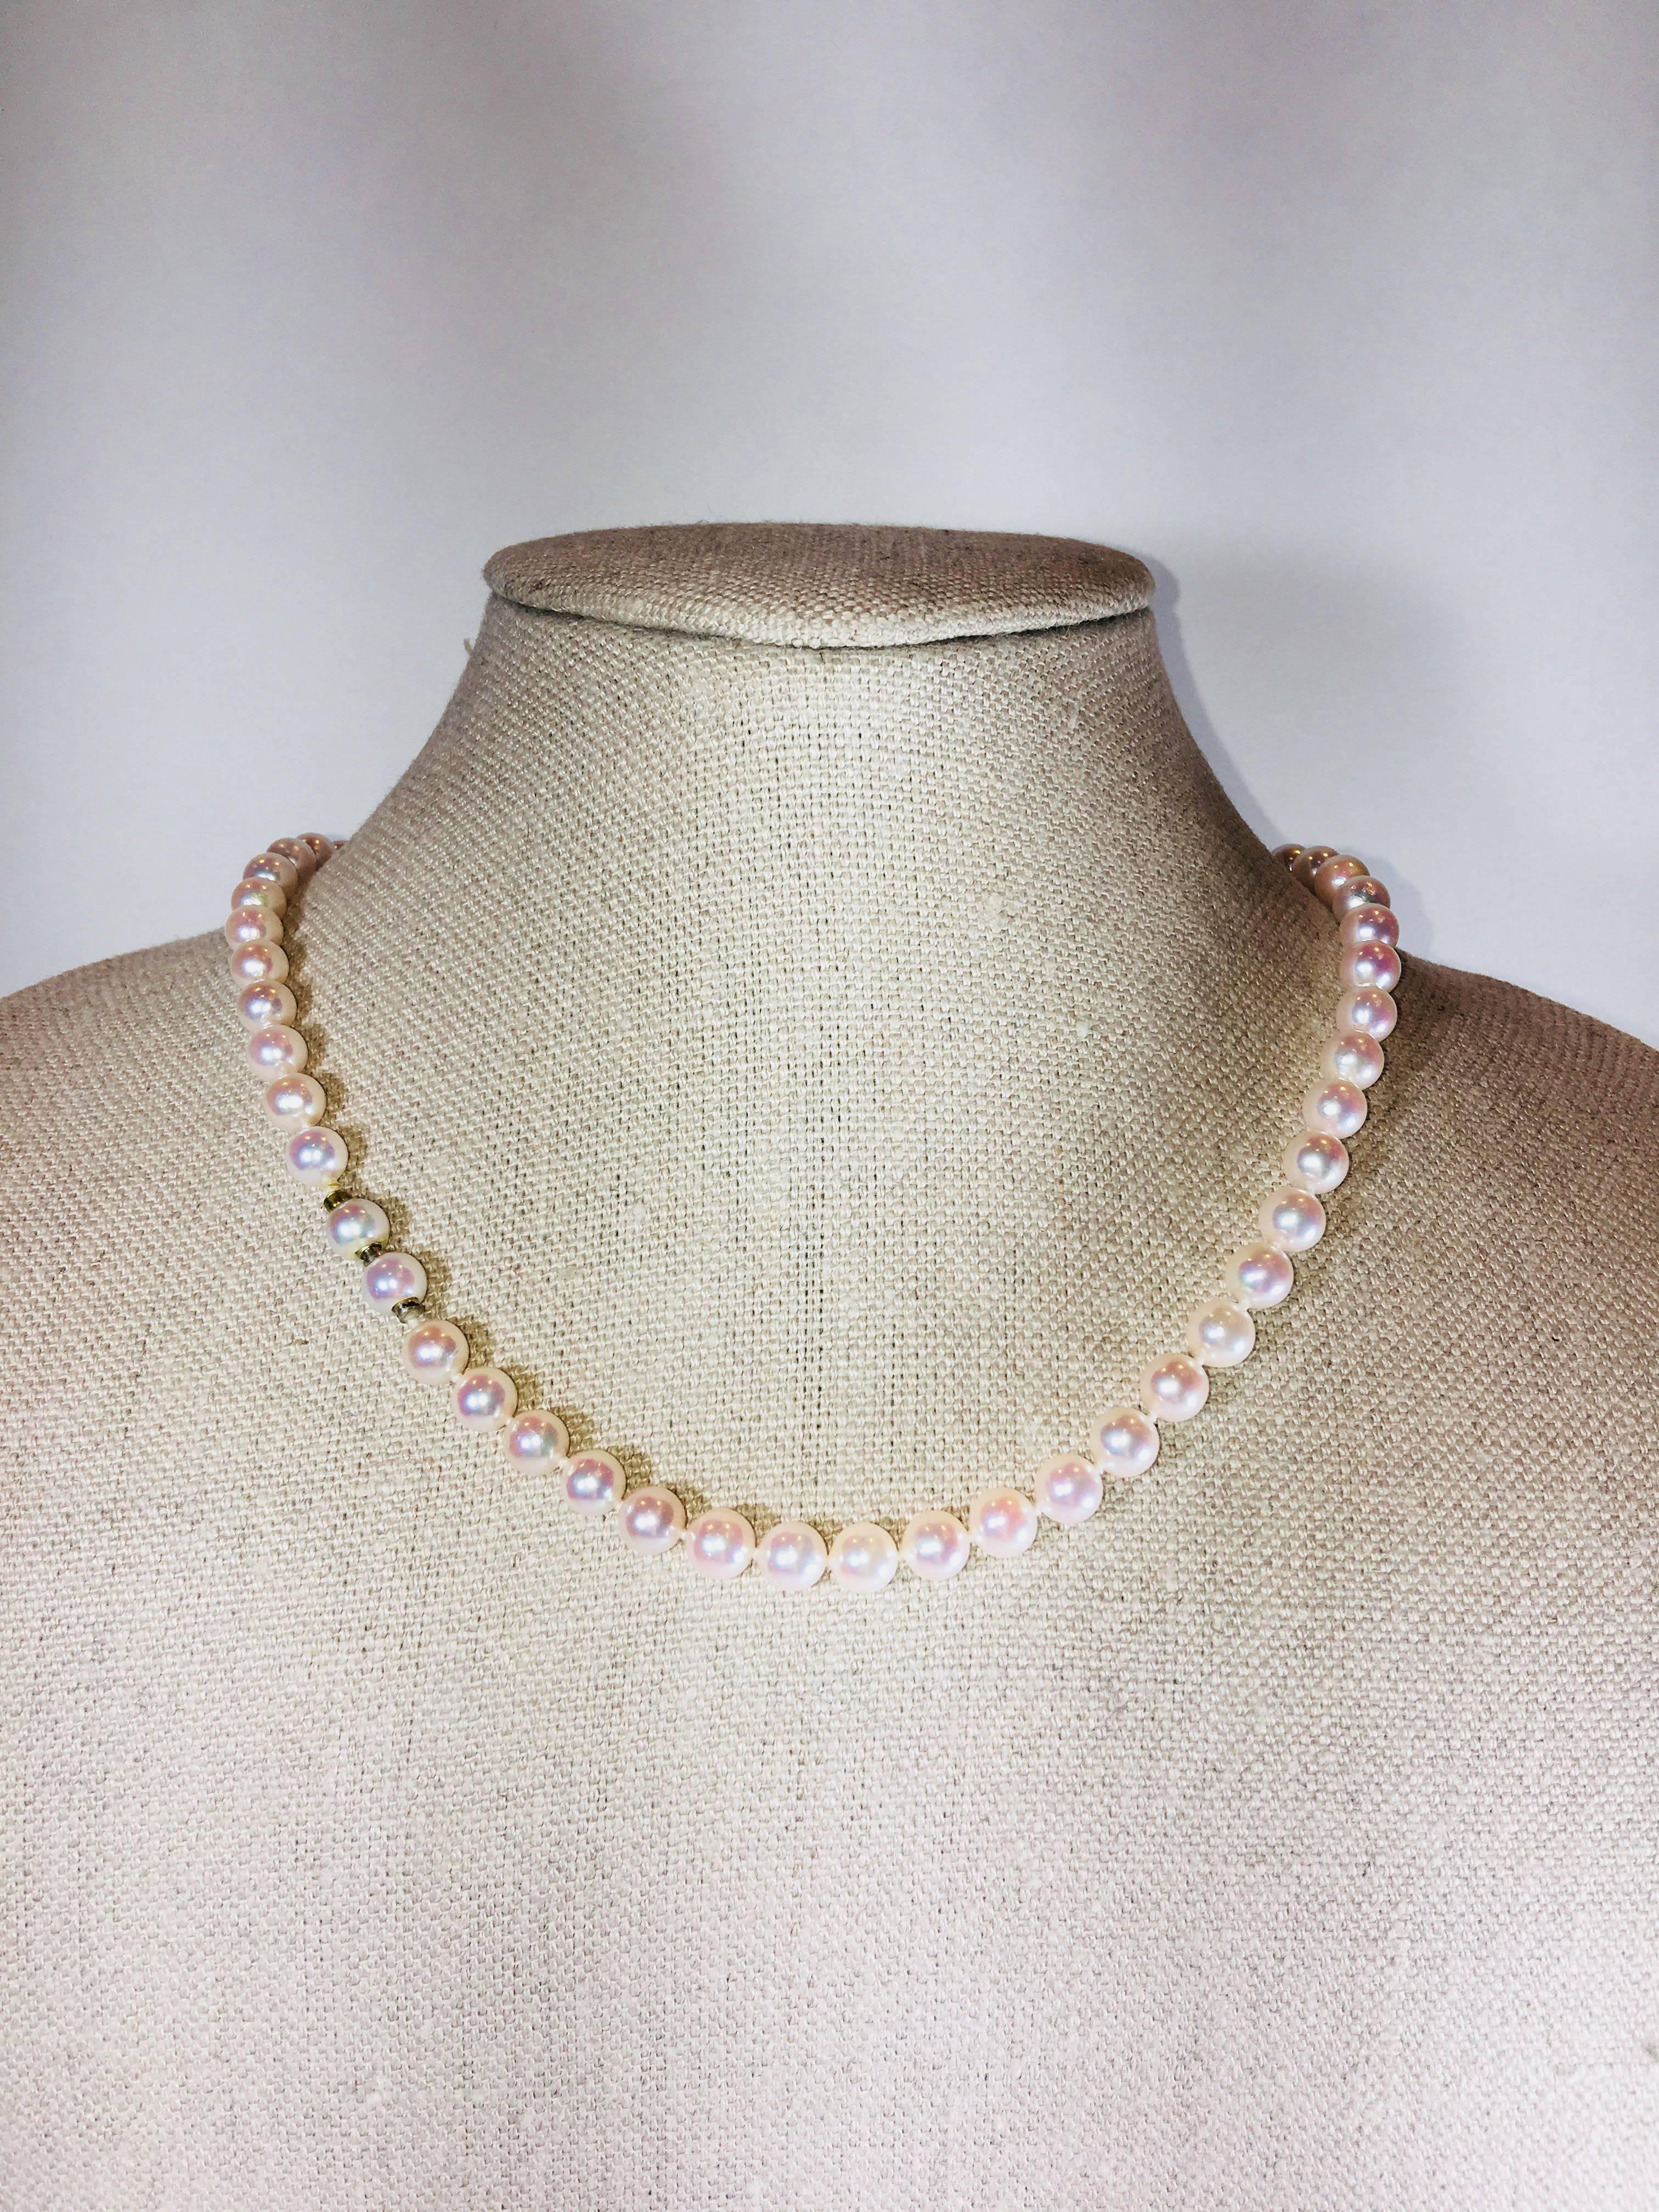 No Label Light Pink Pearl Strand Choker Necklace // 17” long